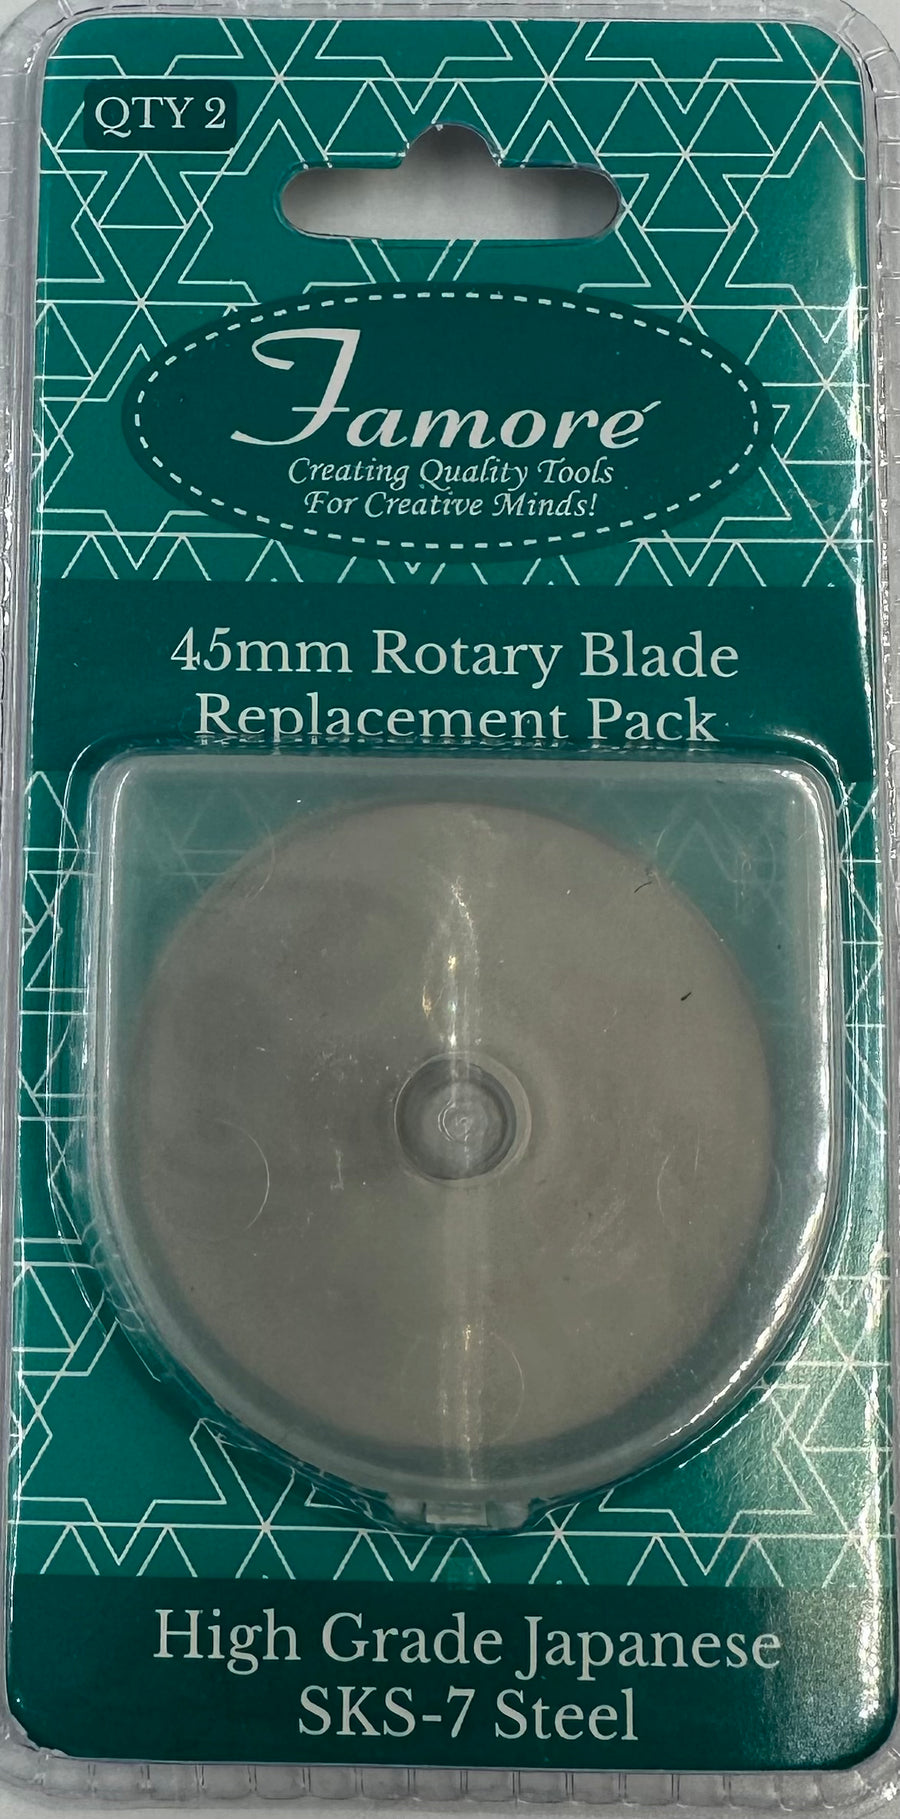 45mm Rotary Cutter Refill, 2-pack